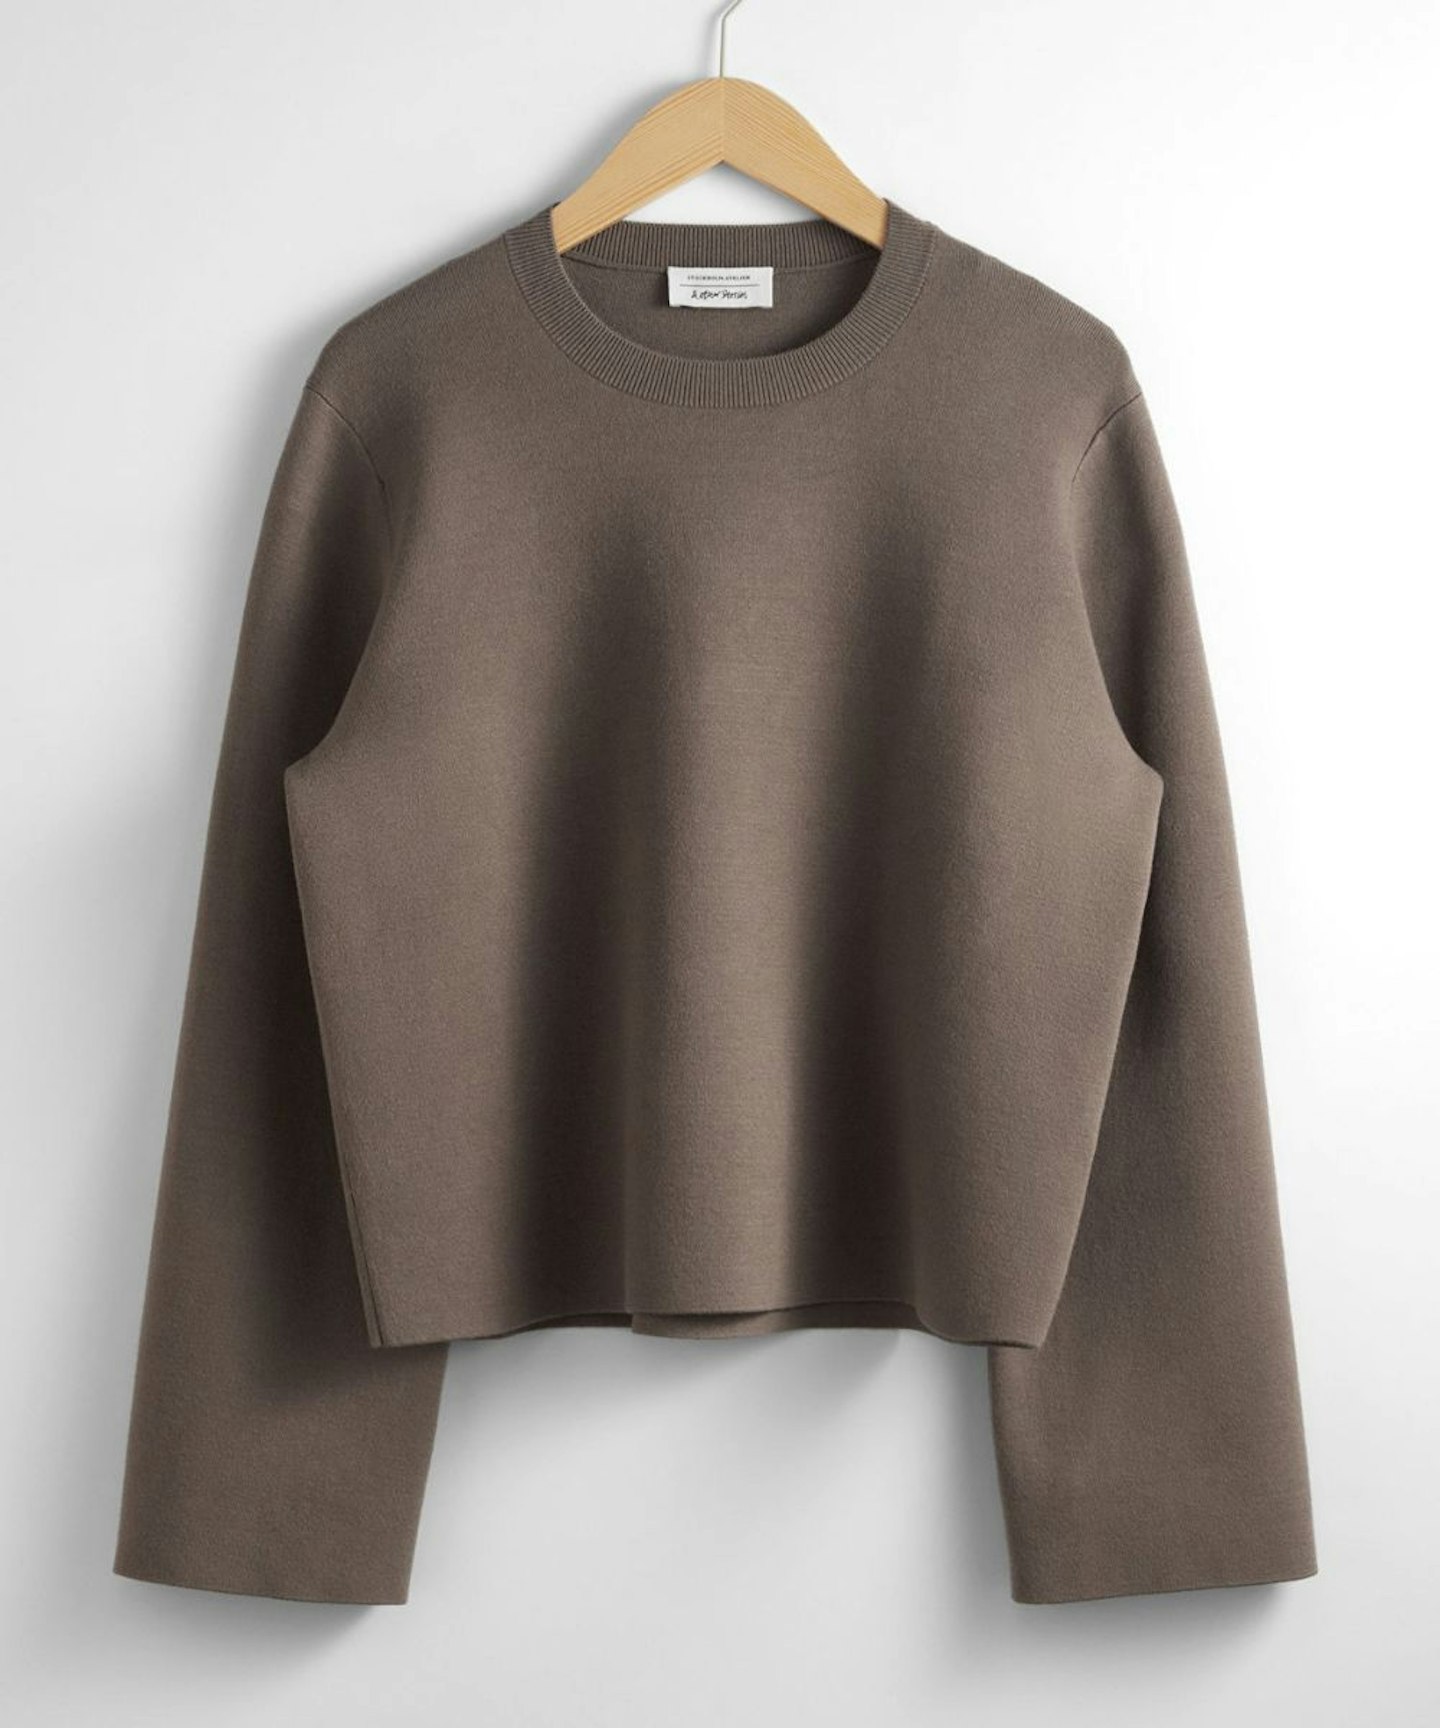 & Other Stories, Wide-Sleeve Knit Sweater